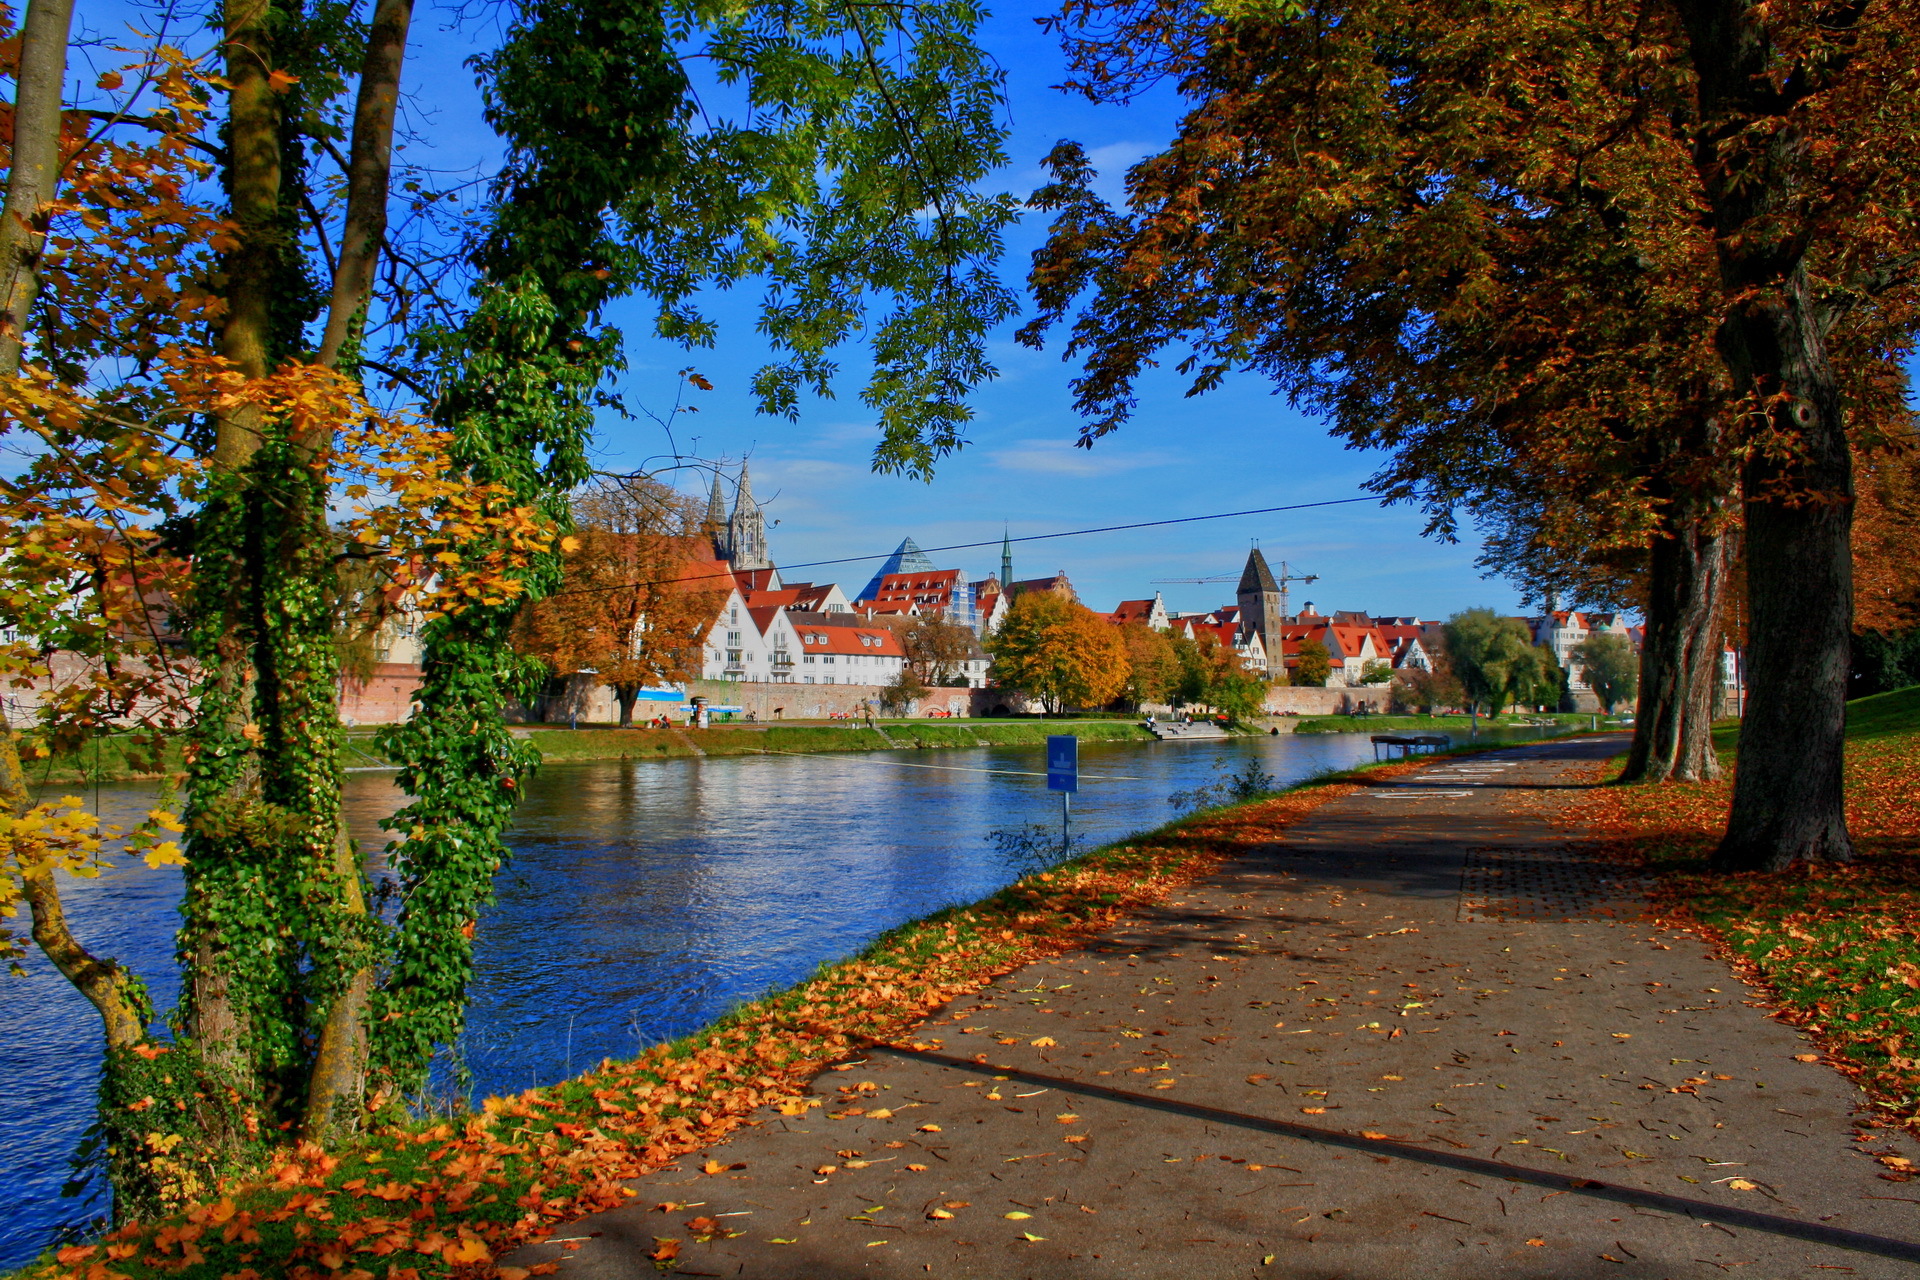 bavaria, germany, man made, town, river, towns